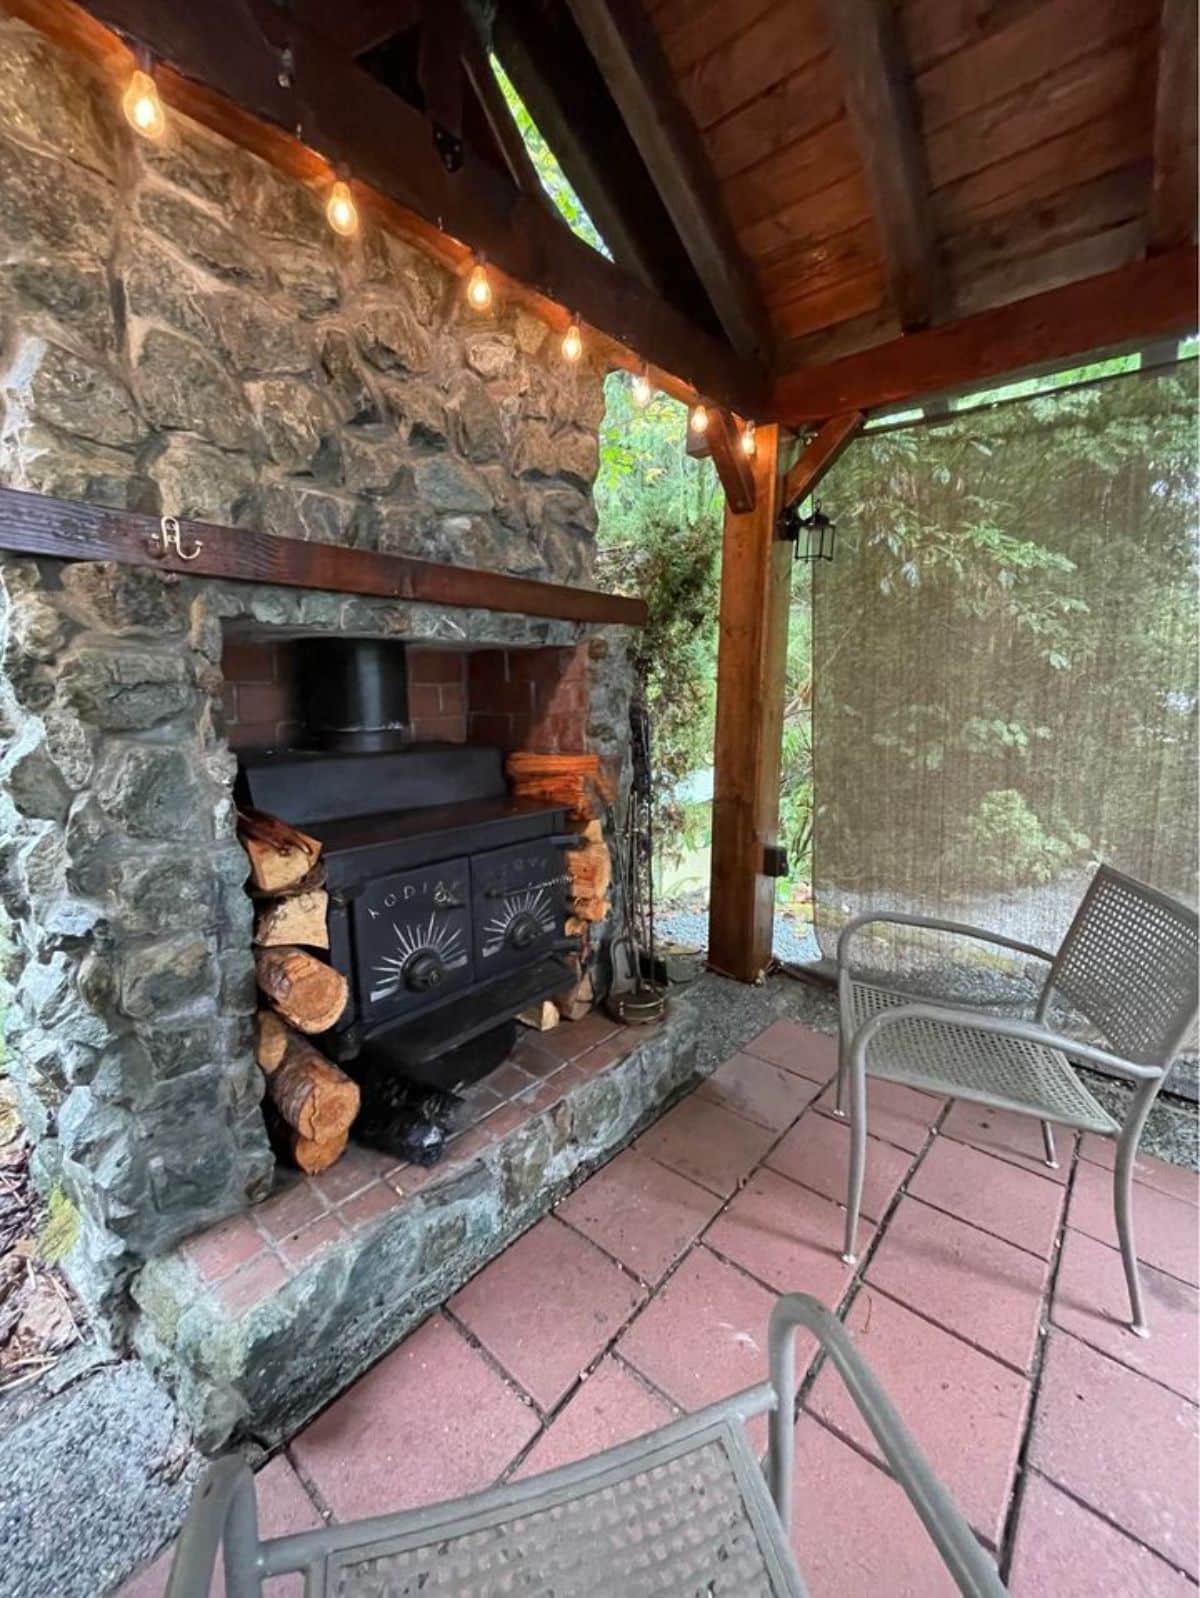 an electric fireplace in the shed makes it more rustic and elegant